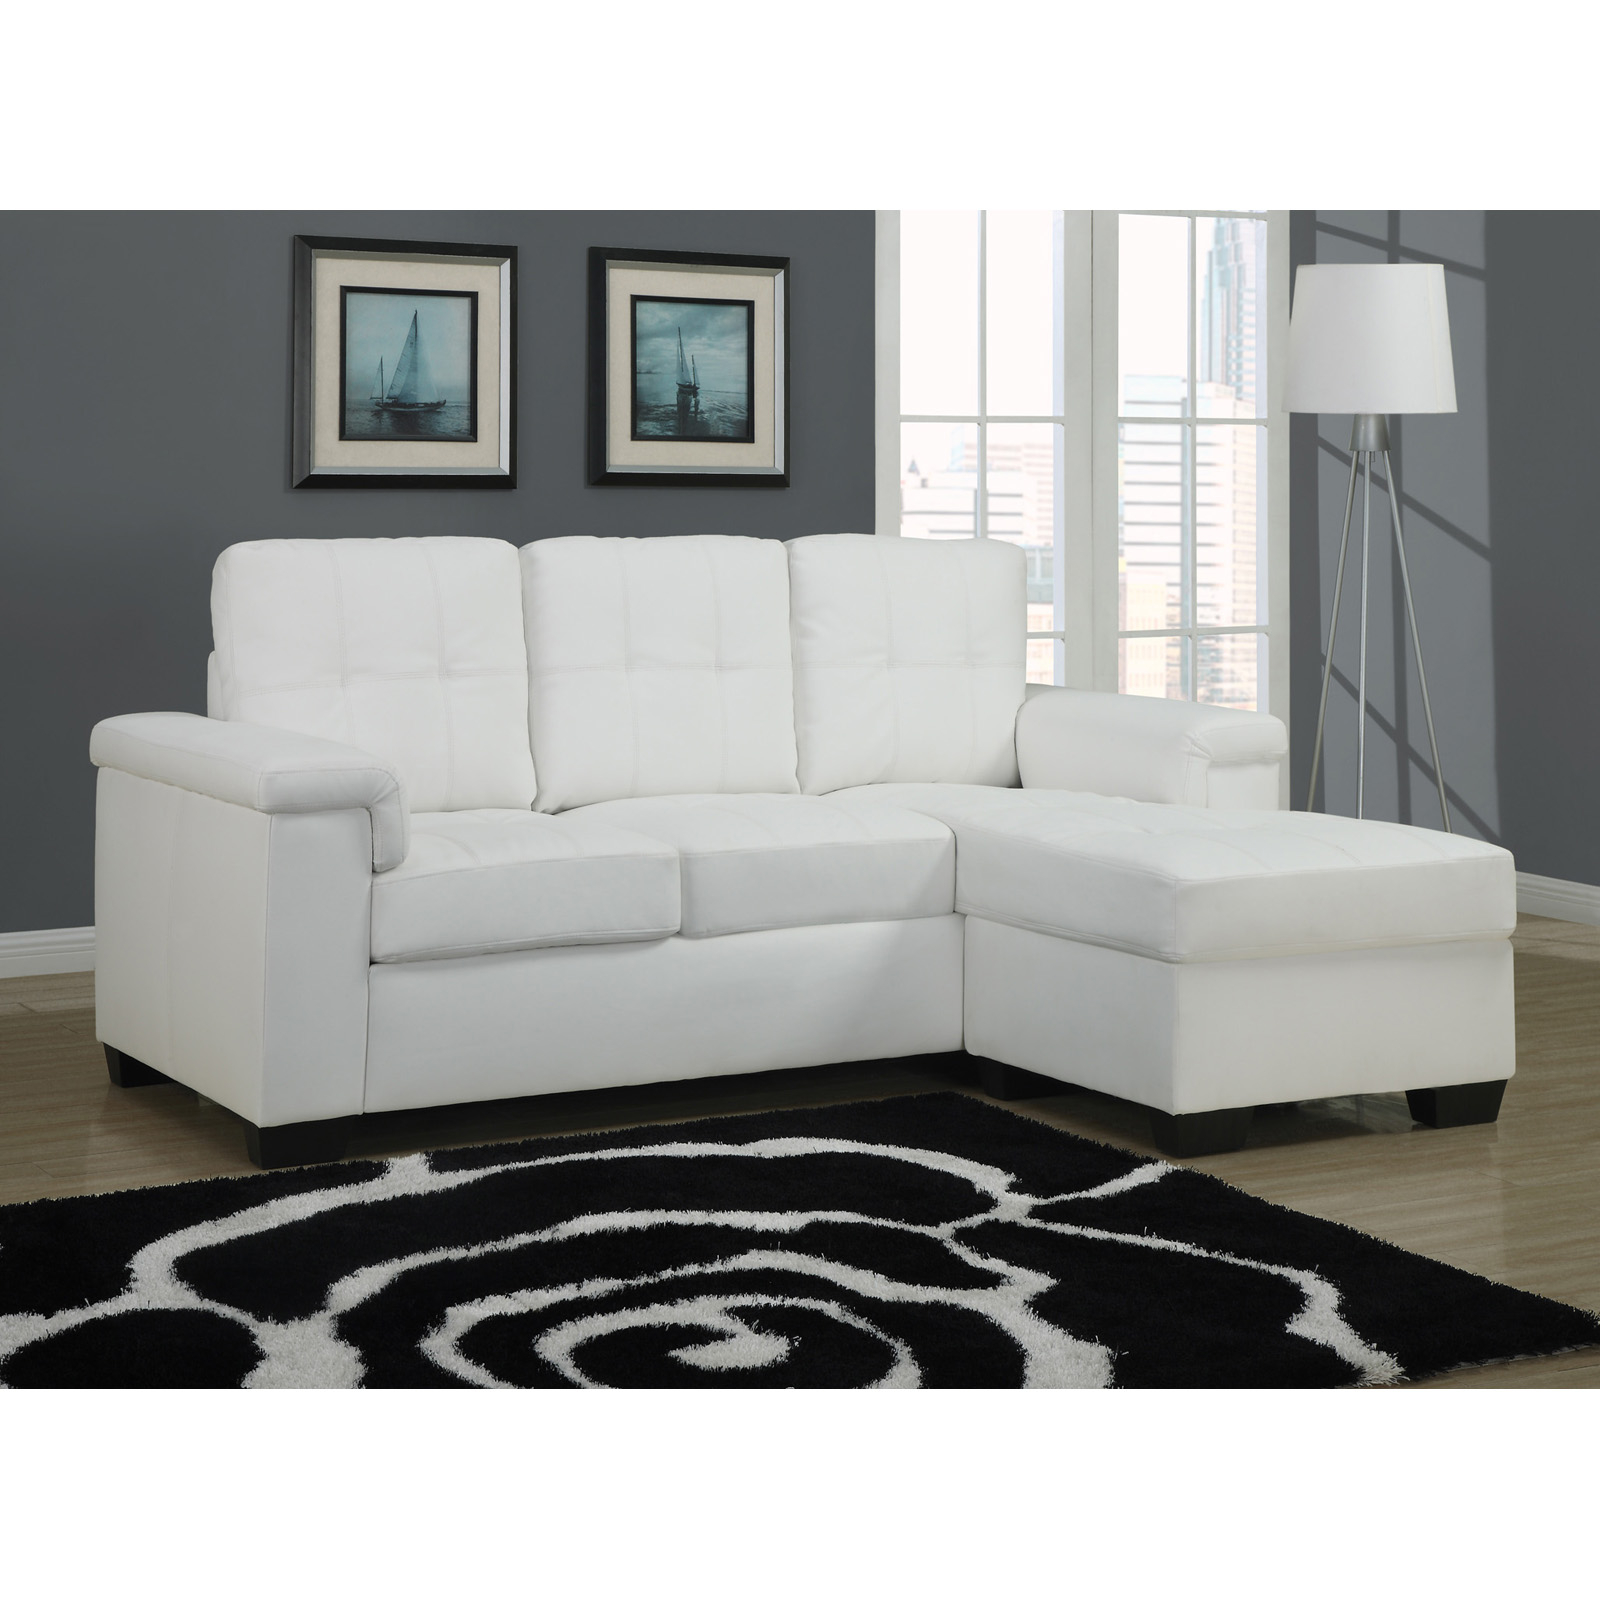 Monarch Specialties Bonded Leather/PU Sectional, White